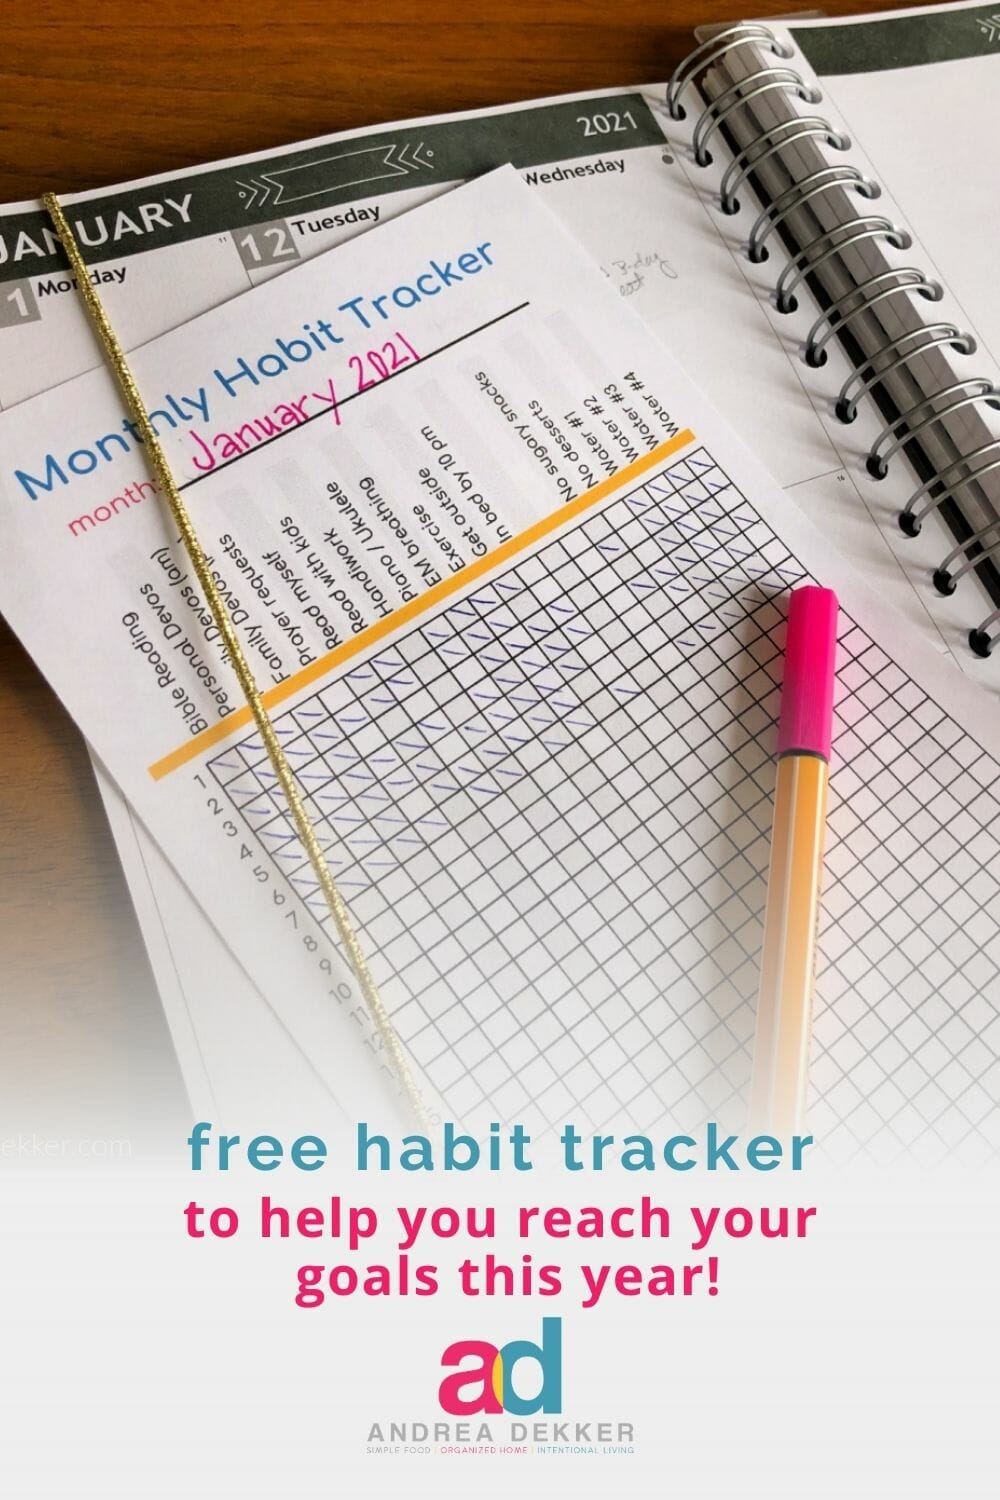 Download the free Habit Tracker to keep yourself more accountable and track your progress on a daily basis this year! via @andreadekker